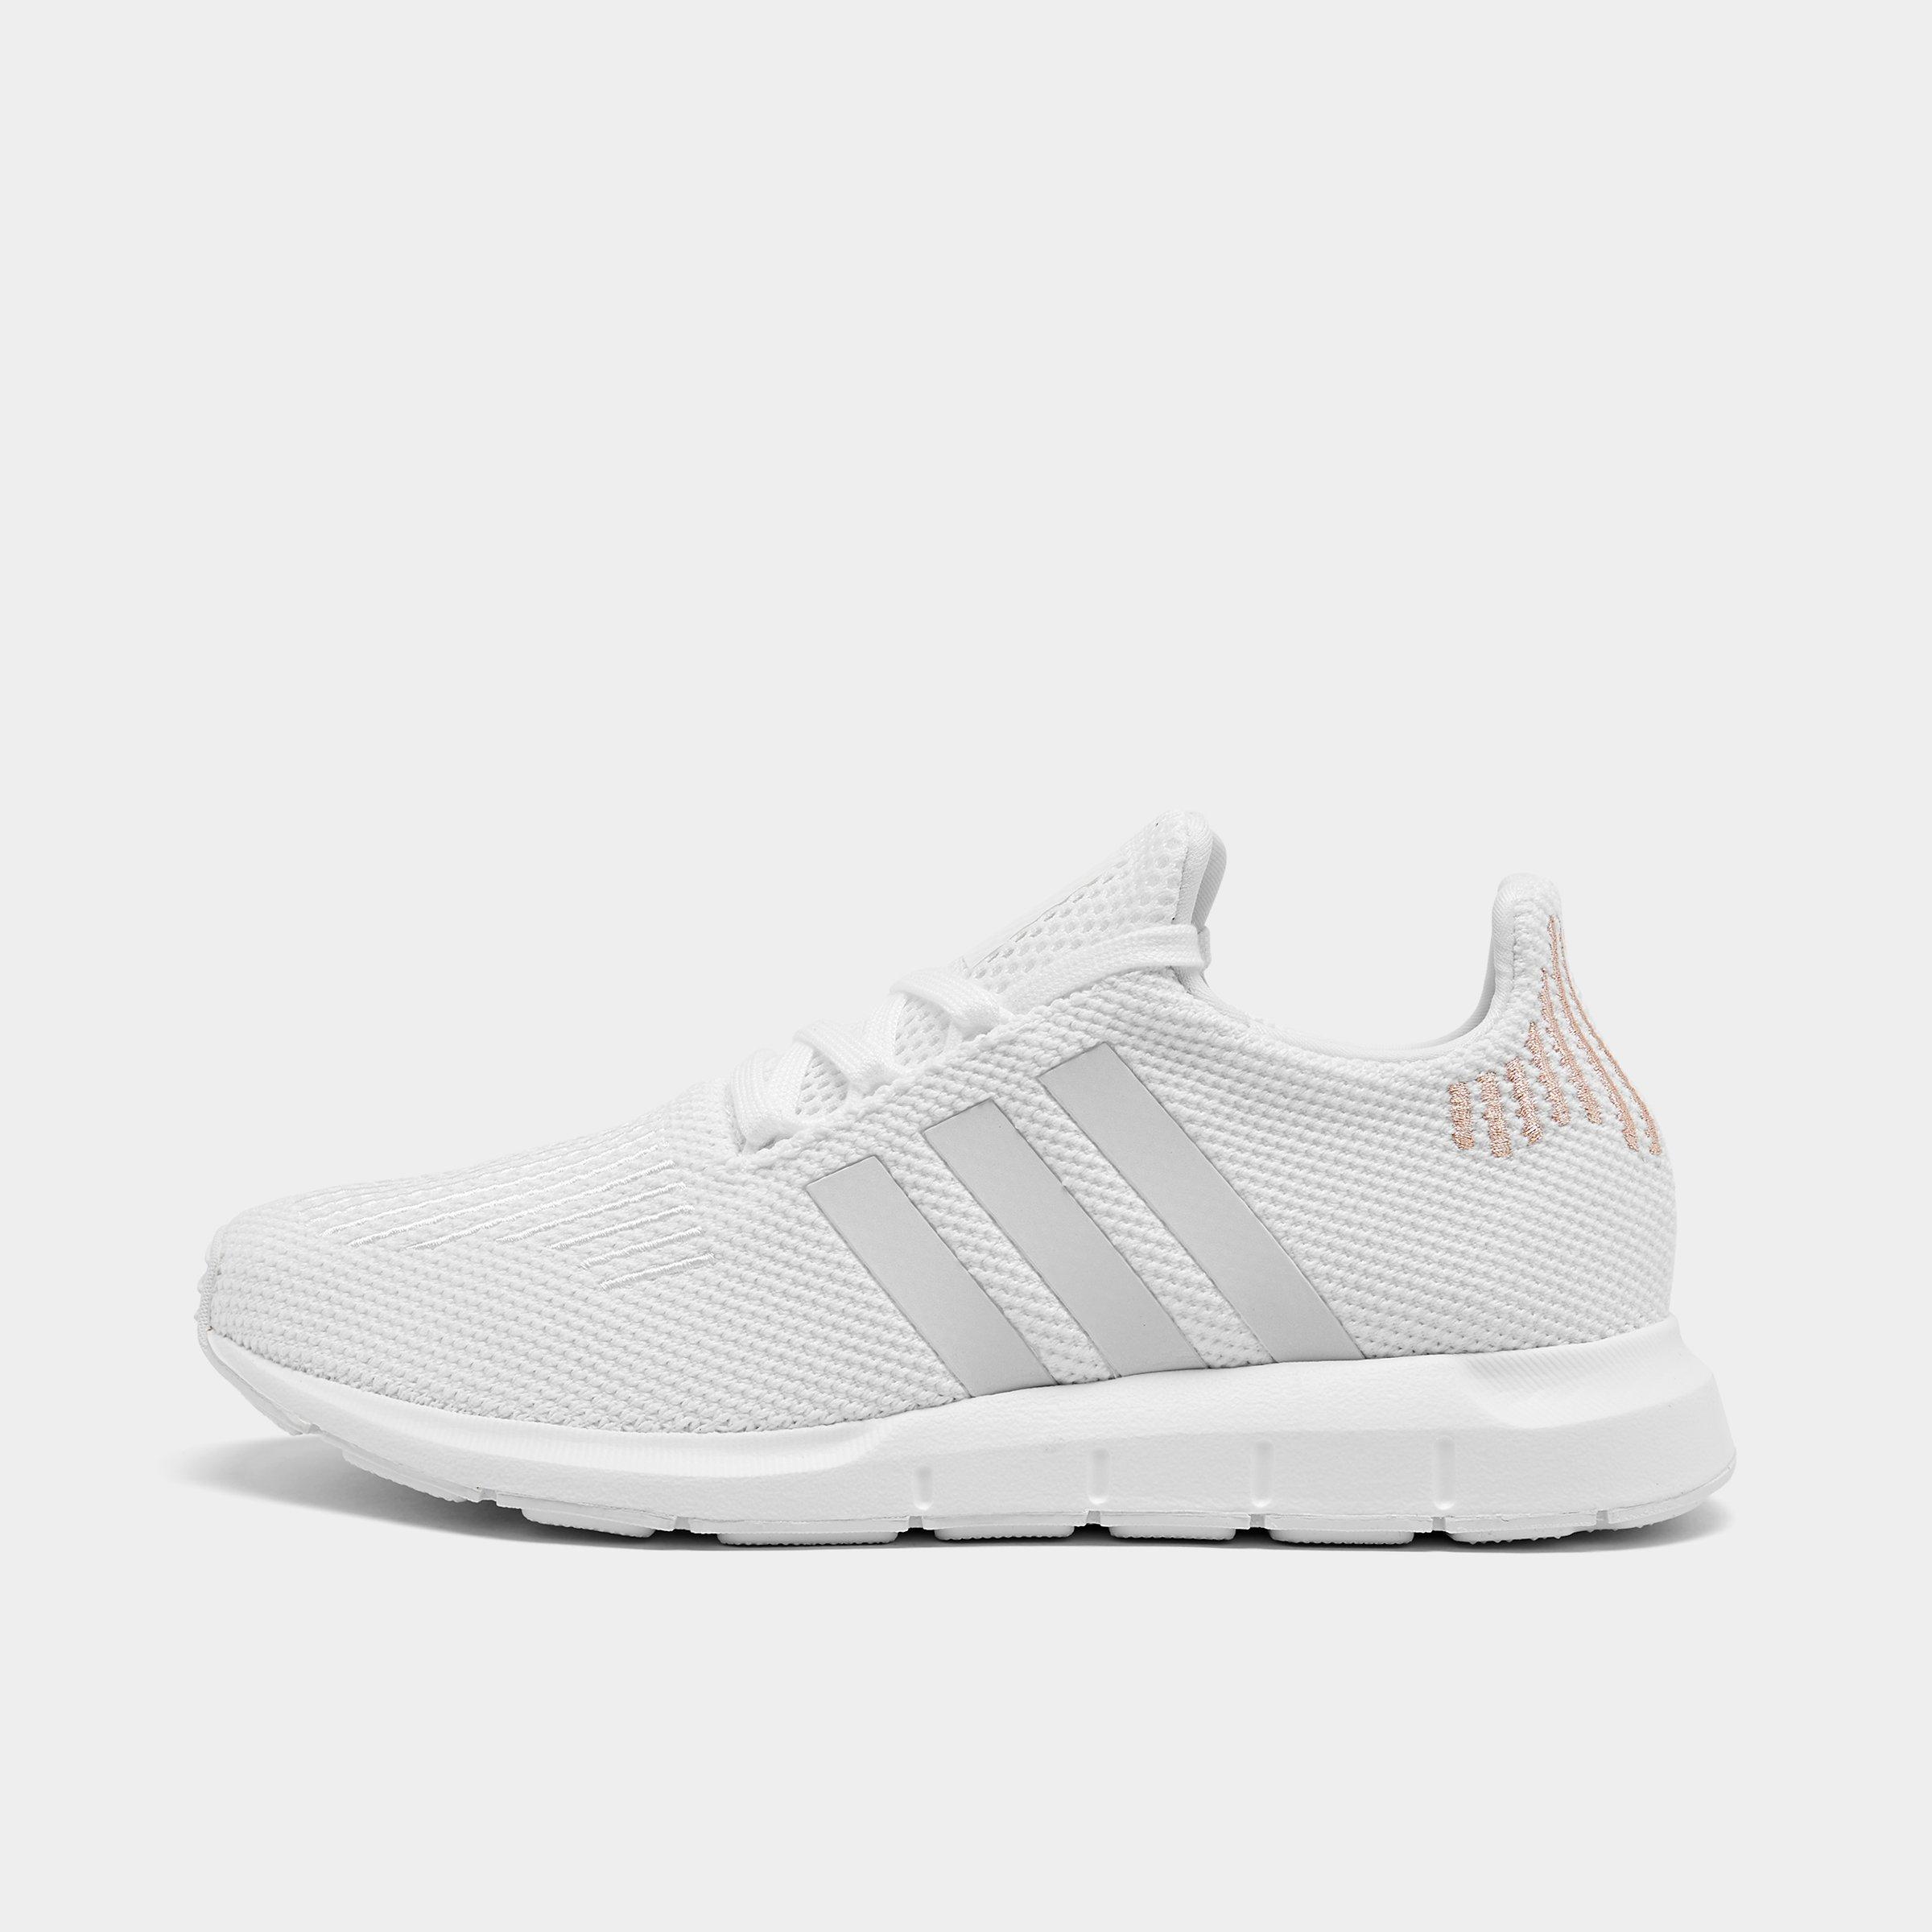 adidas swift run white and crystal shoes